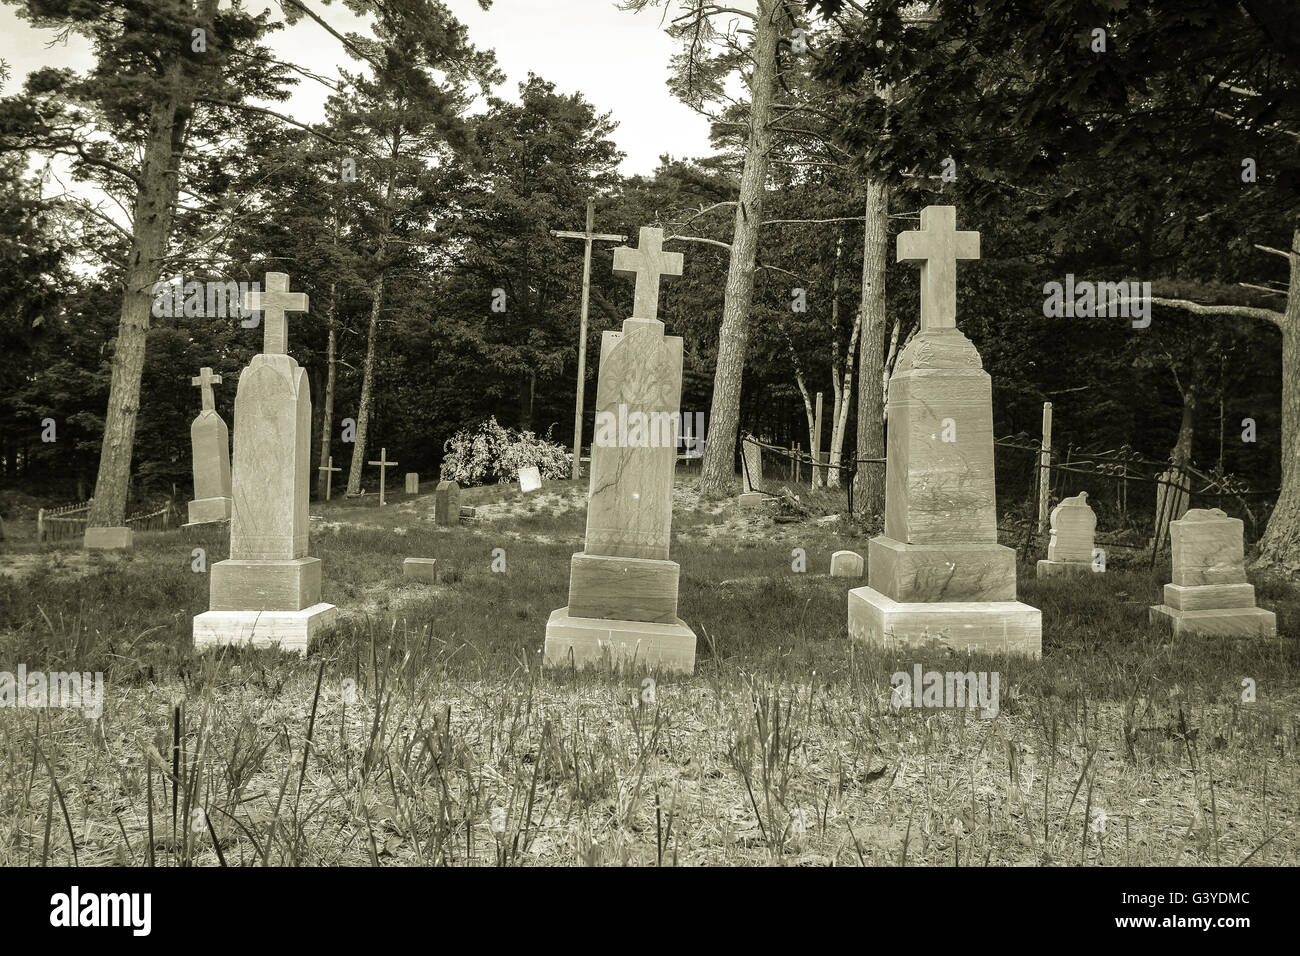 Haunted cemetery with tombstones and cross. Stock Photo